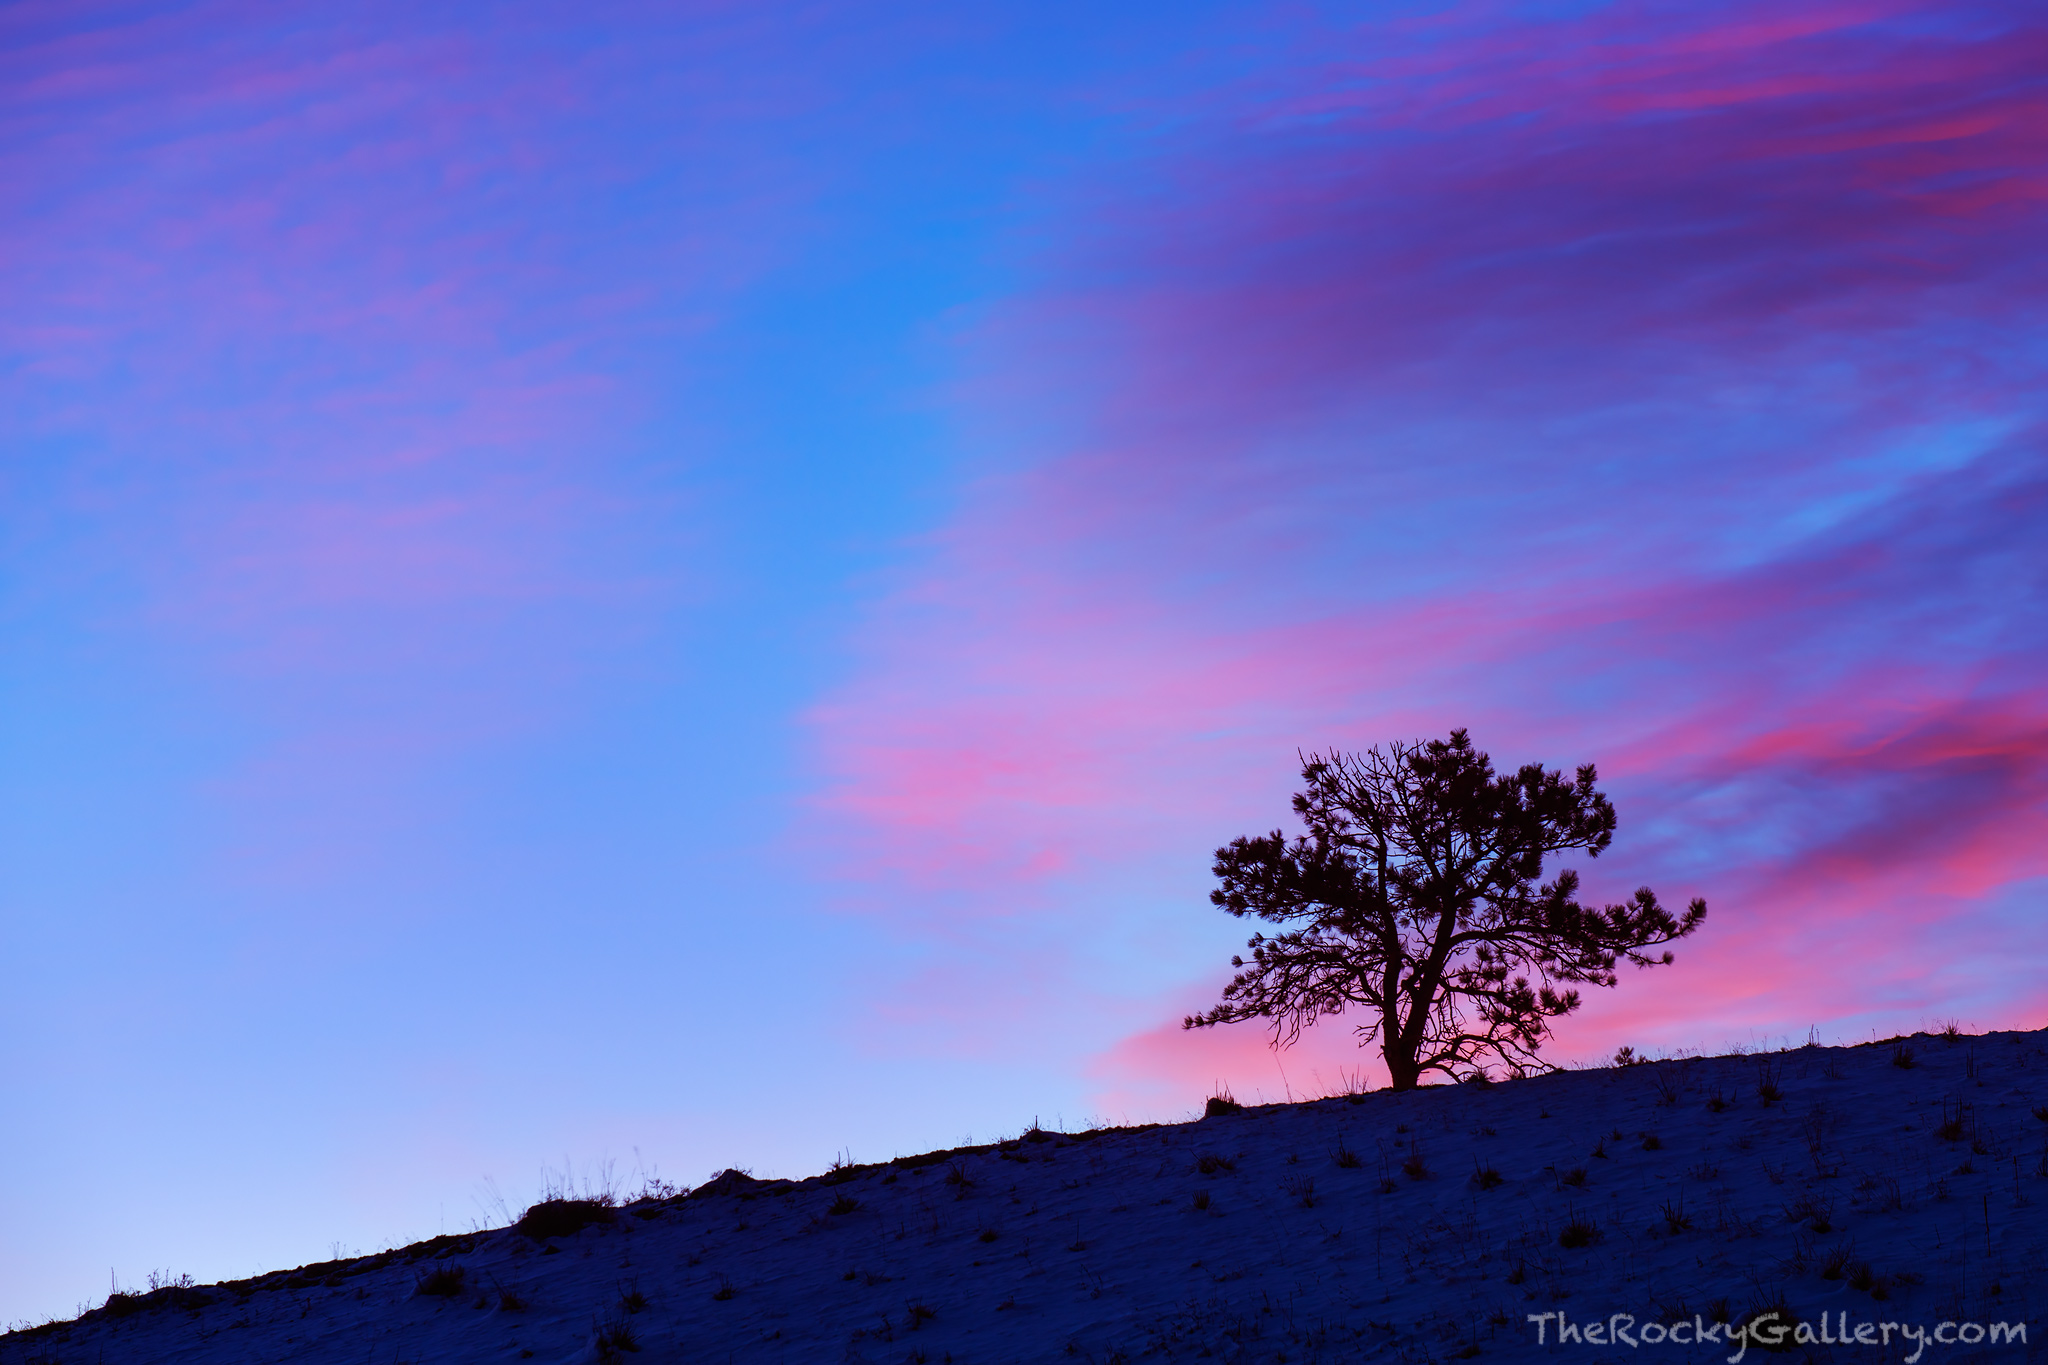 Sunrise reveals a colorful sky over Boulder,Colorado near Four Mile Creek Open Space. The pastels in the sky appear as if created...